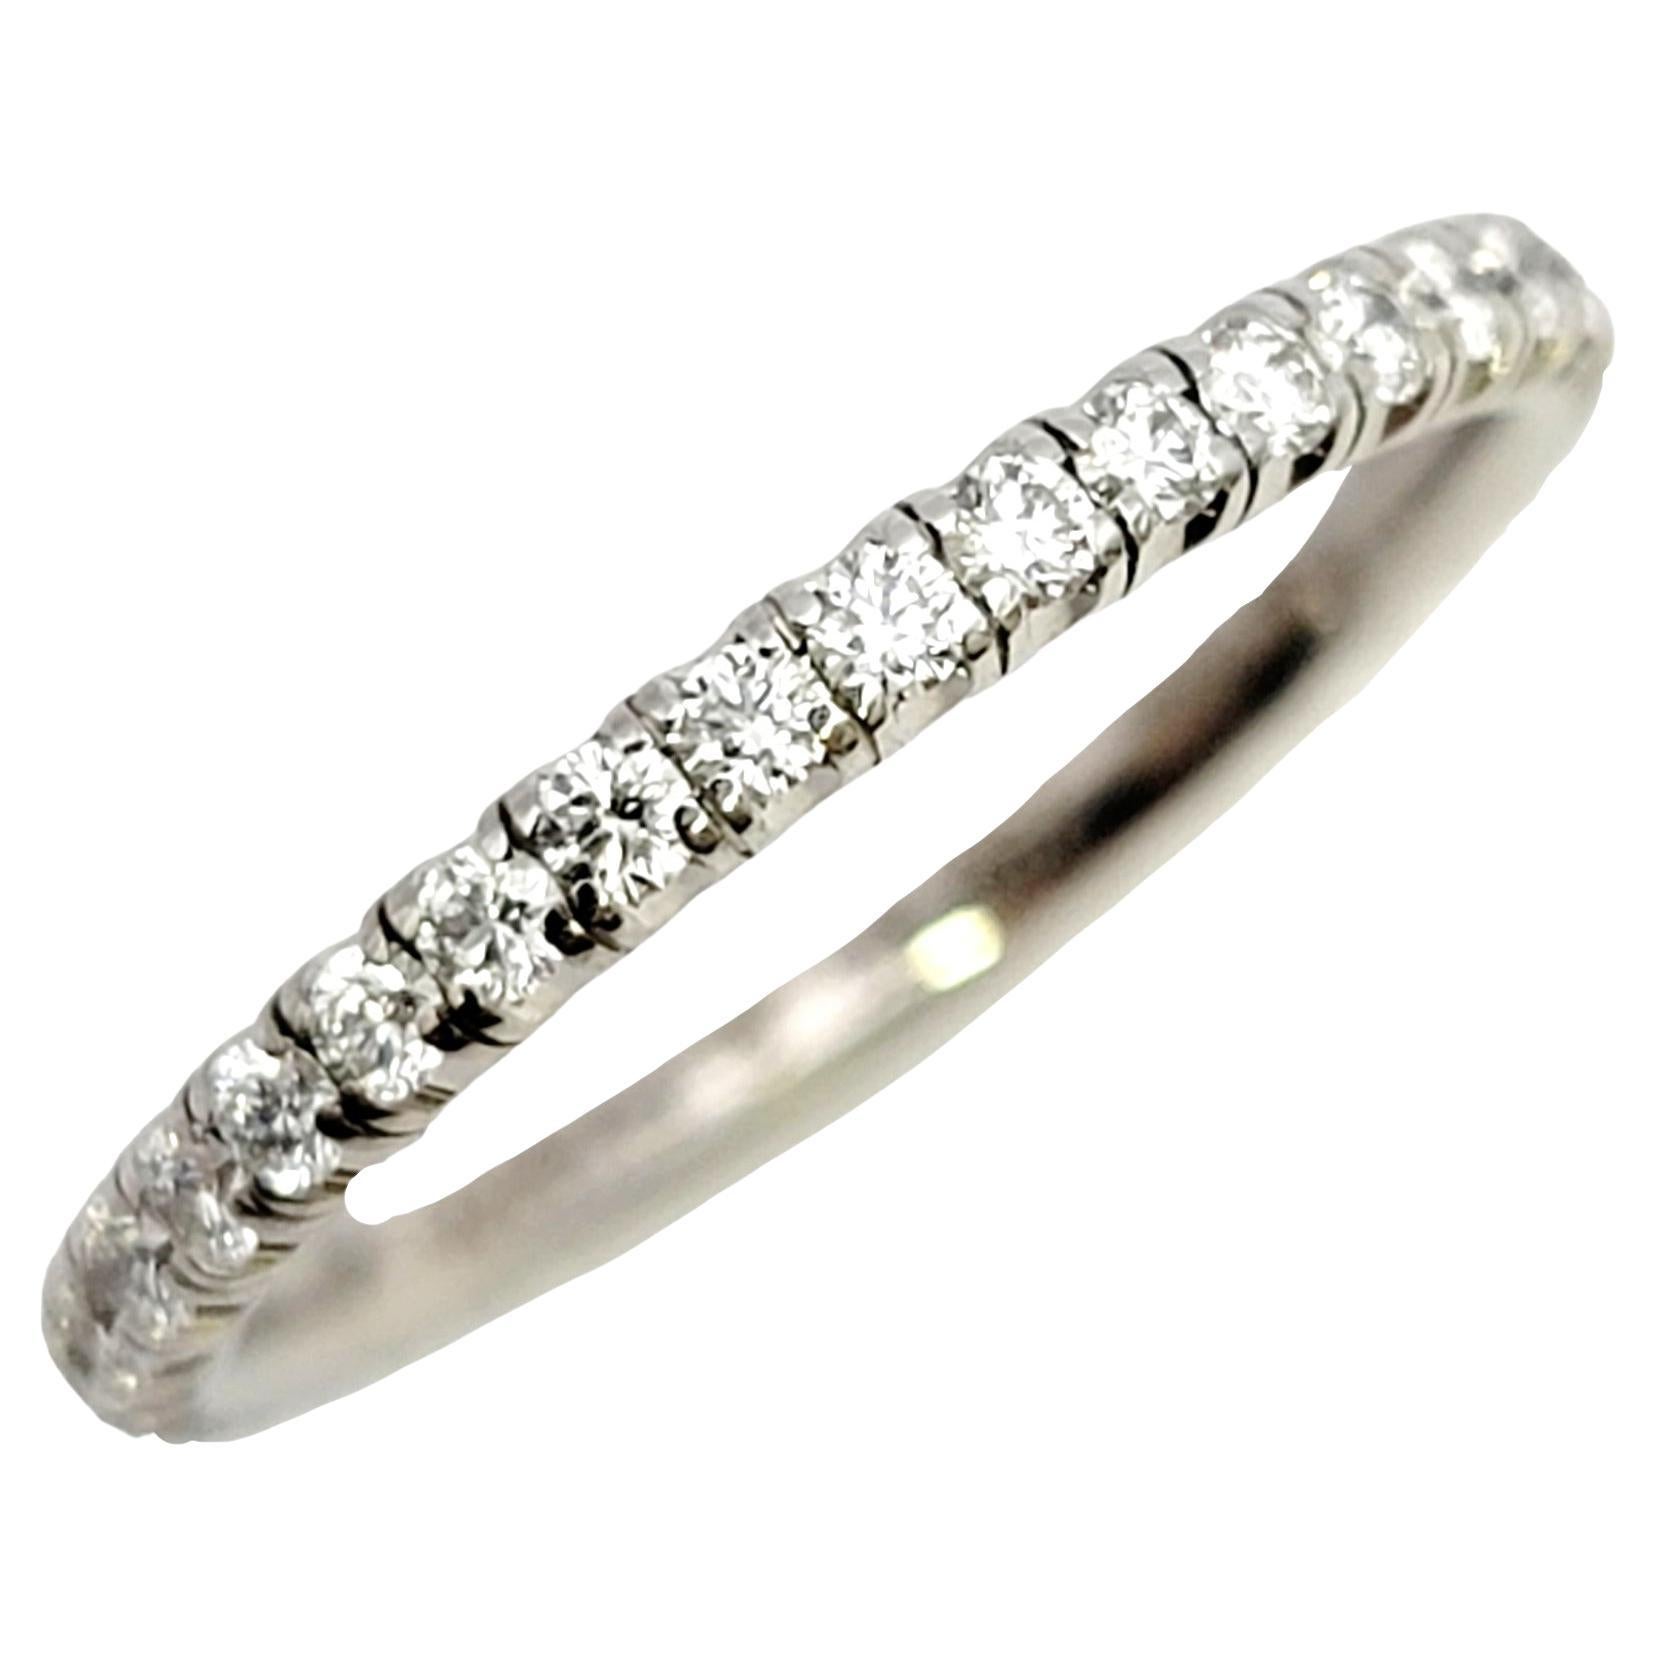 This absolutely gorgeous Etincelle de Cartier pave diamond band ring is the epitome of timeless beauty. The petite delicate paved band boasts an ultra feminine feel, while the sleek simplicity and clean lines give the ring just the right touch of